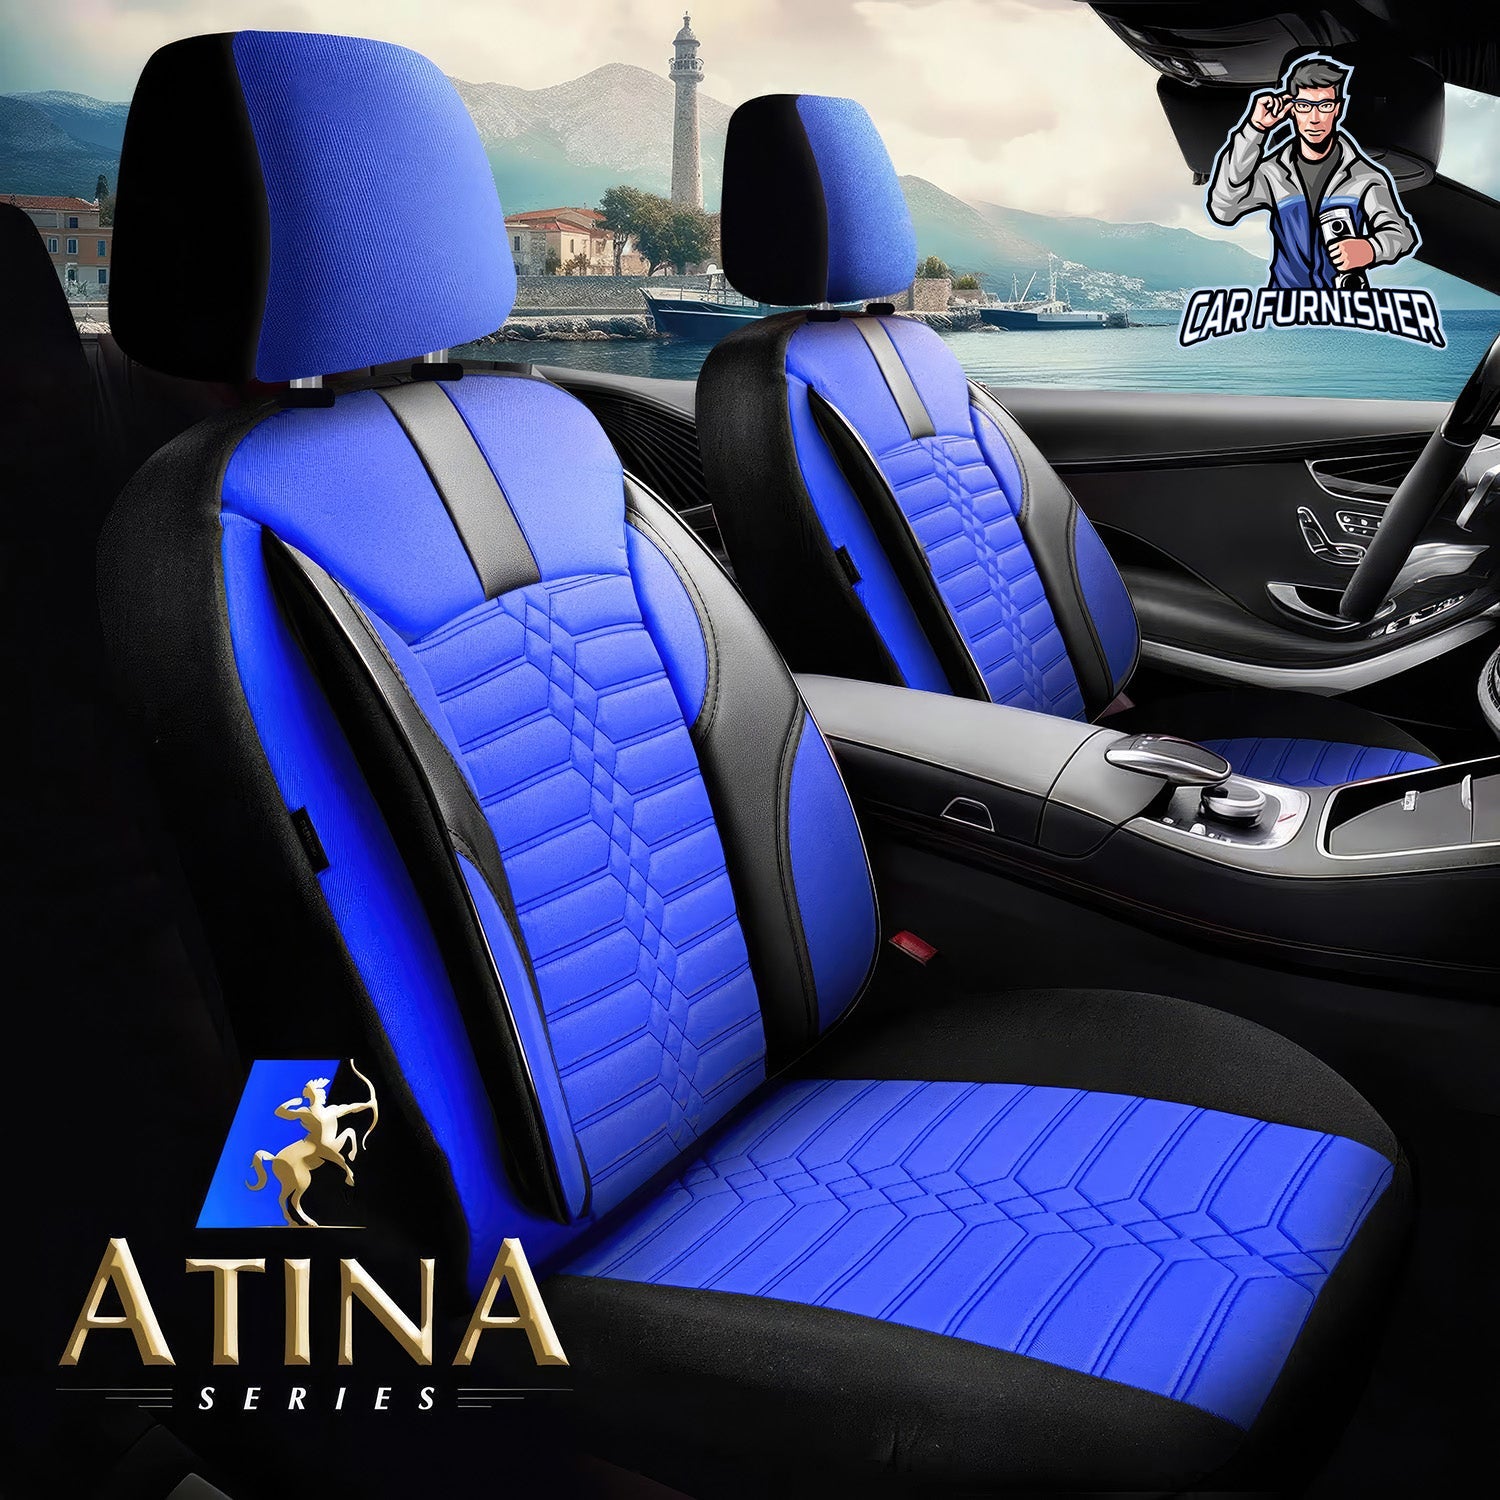 Volkswagen Jetta Seat Covers Athens Design Blue 5 Seats + Headrests (Full Set) Leather & Jacquard Fabric